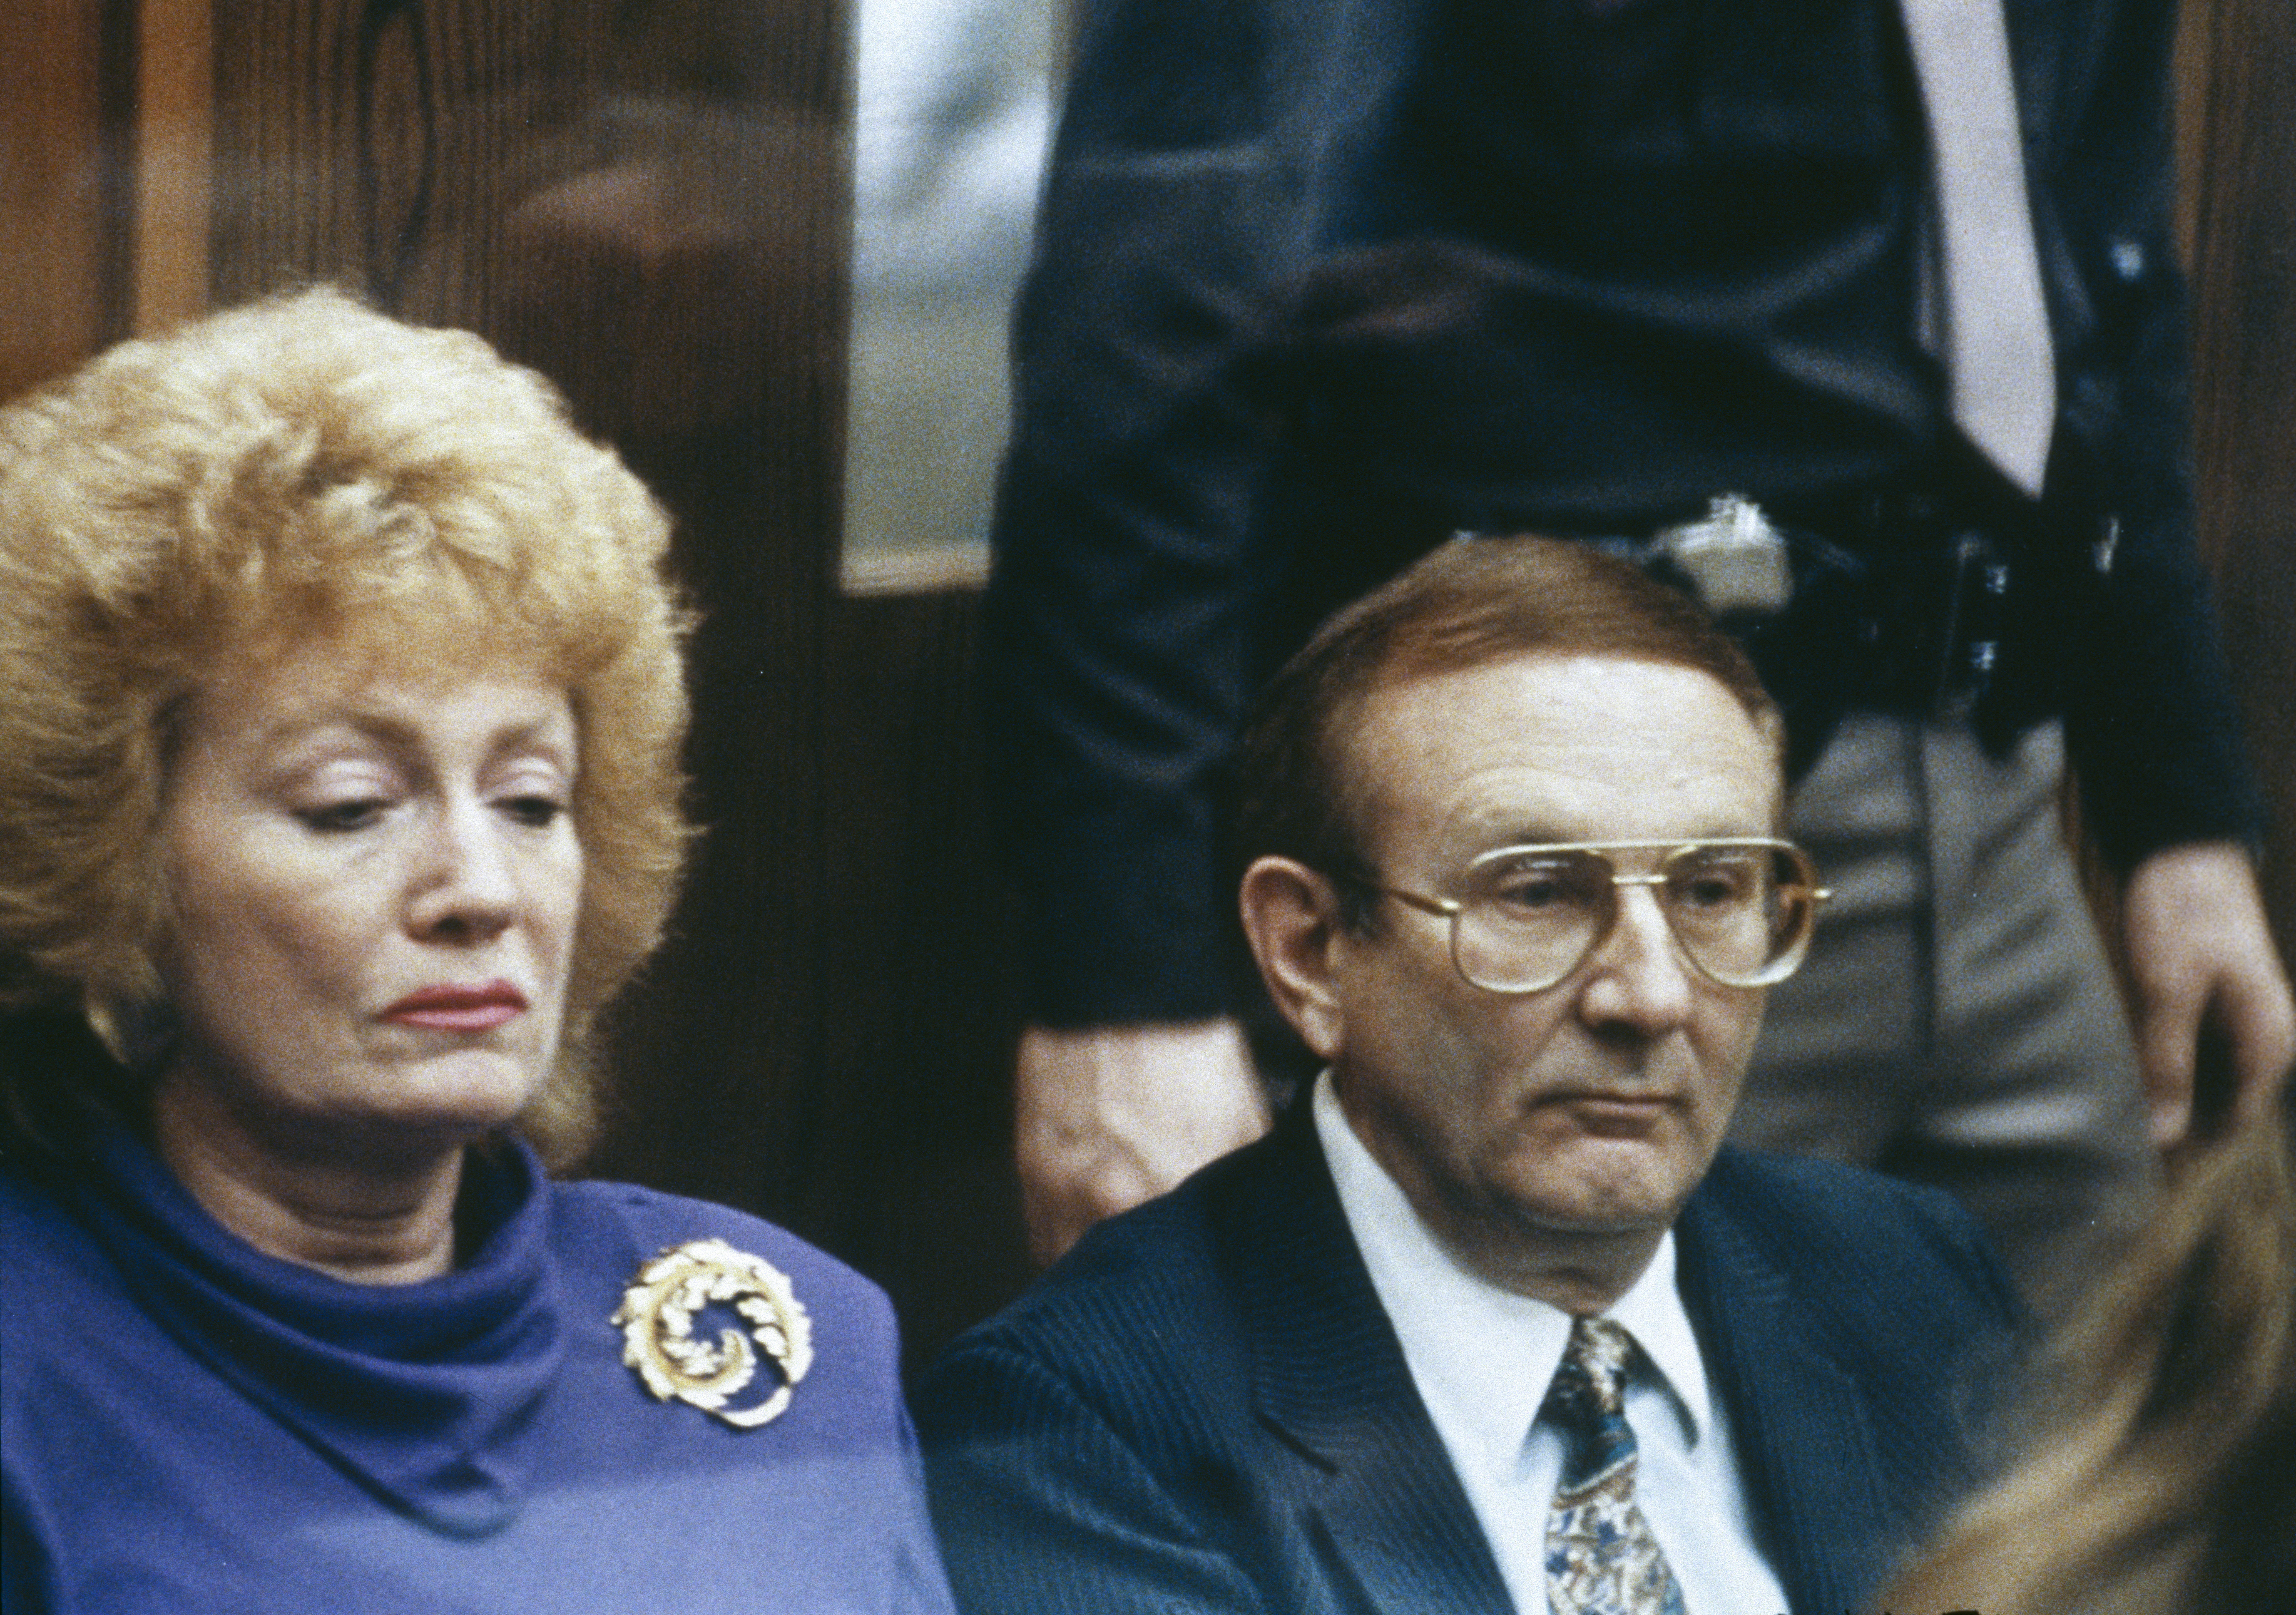 Shari Jordan and Lionel Dahmer at Jeffrey Dahmer's murder trial on January 30, 1992. | Source: Getty Images